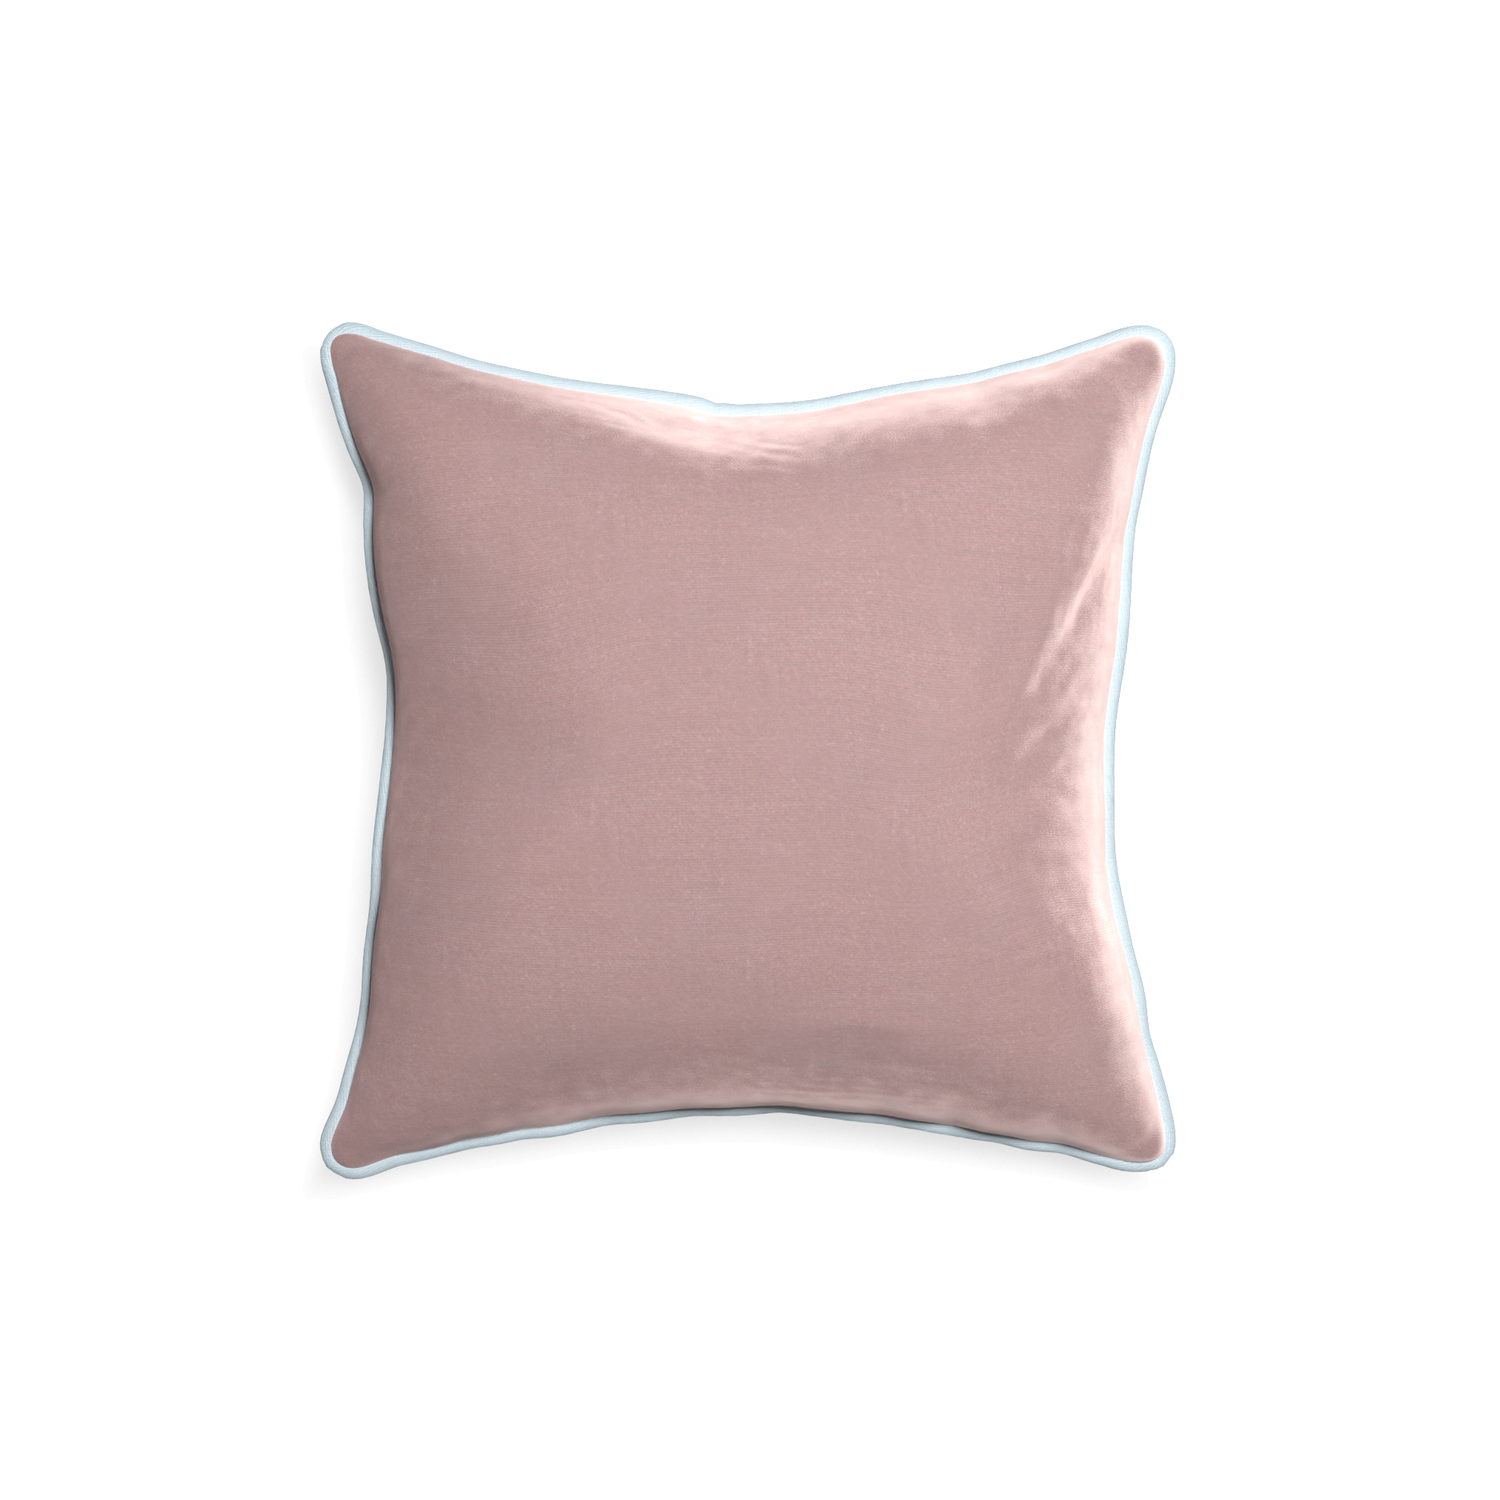 18-square mauve velvet custom pillow with powder piping on white background